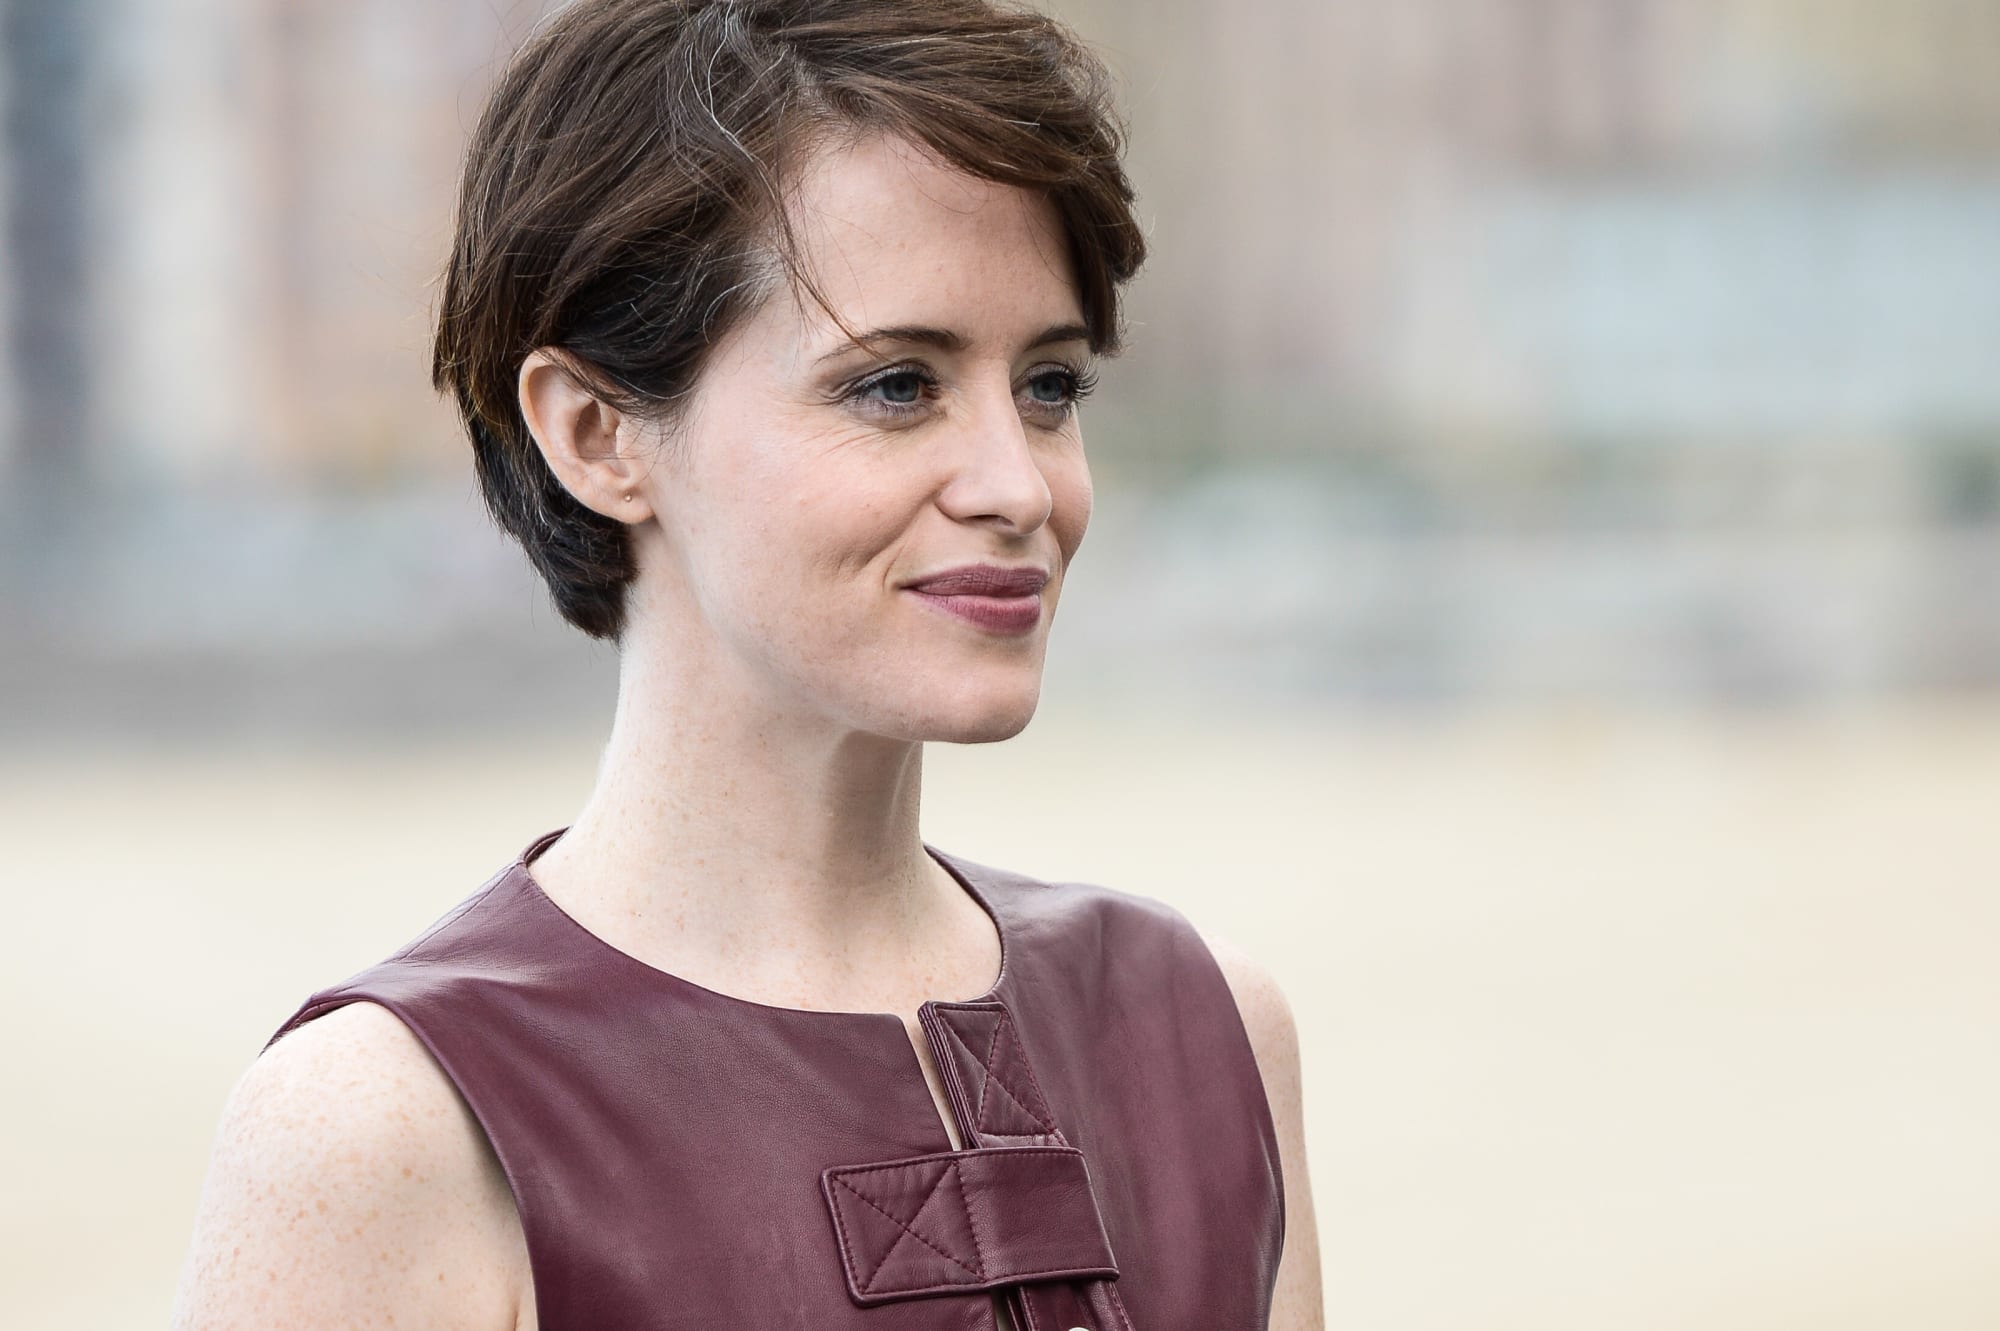 Saturday Night Live: What to watch for with host Claire Foy